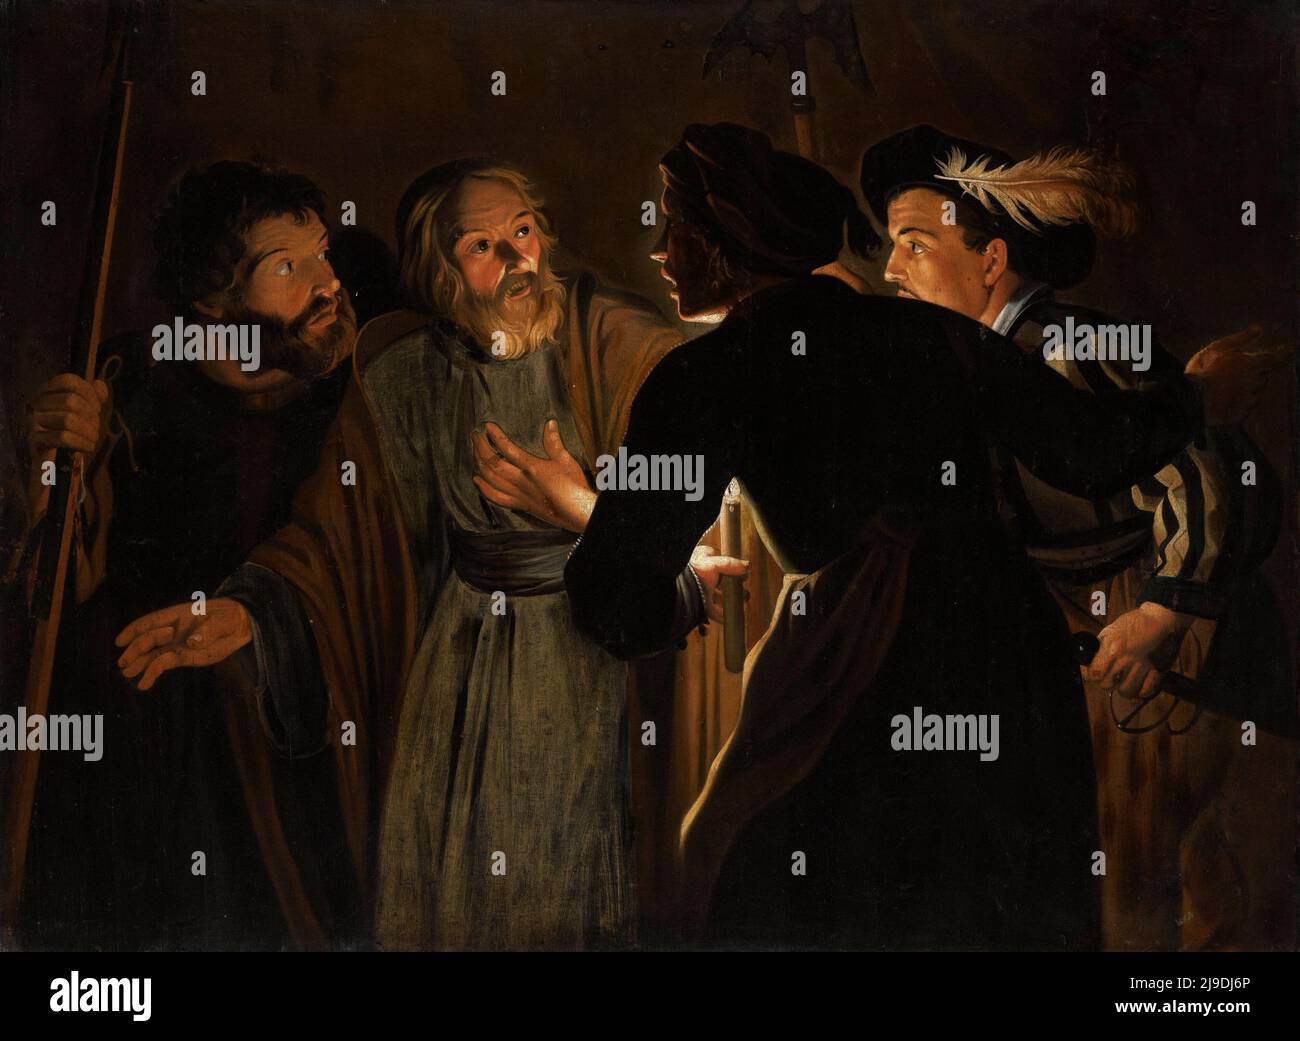 The Denial of Saint Peter by Gerard Seghers. This painting depicts the scene where, after the arrest of Jesus, St Peter denies knowing him when being confonted by the by the authorities. Stock Photo